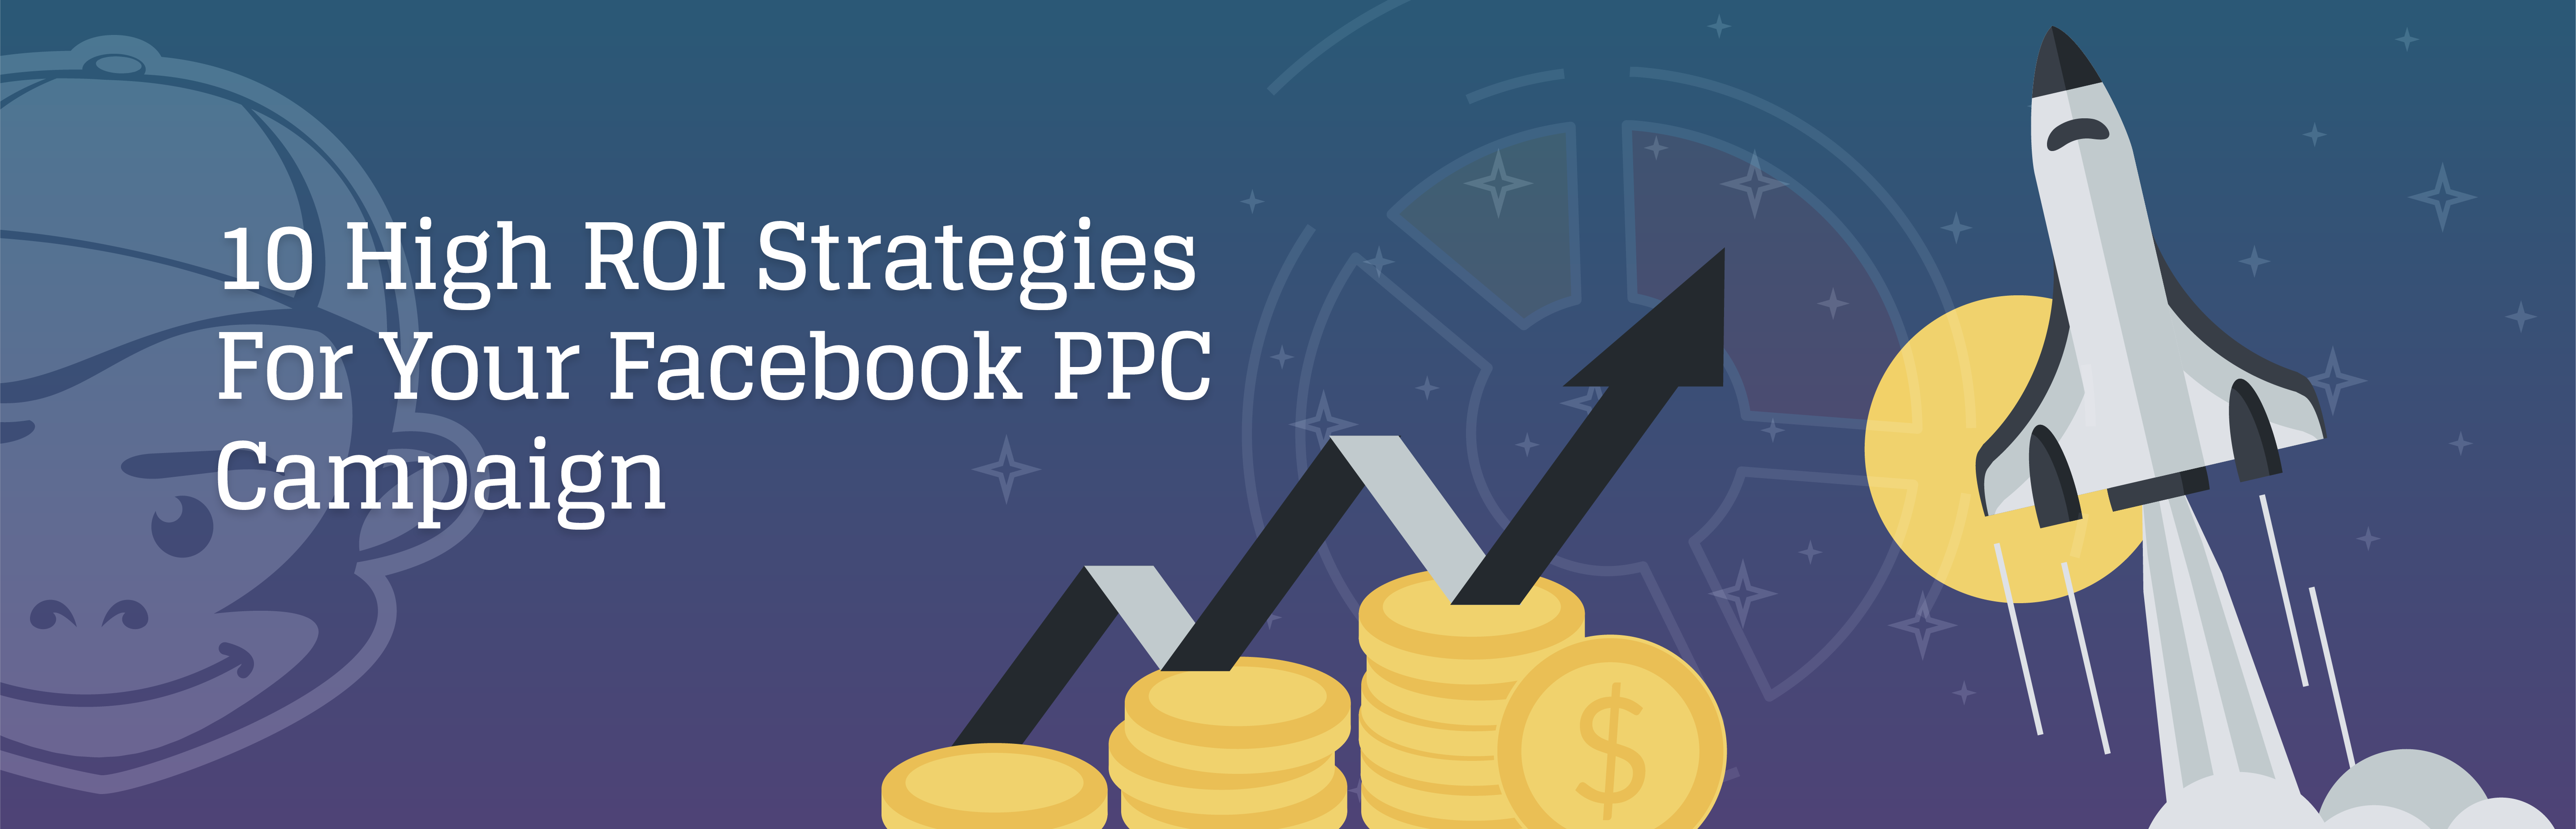 10 High ROI Strategies for Your Facebook PPC Campaign